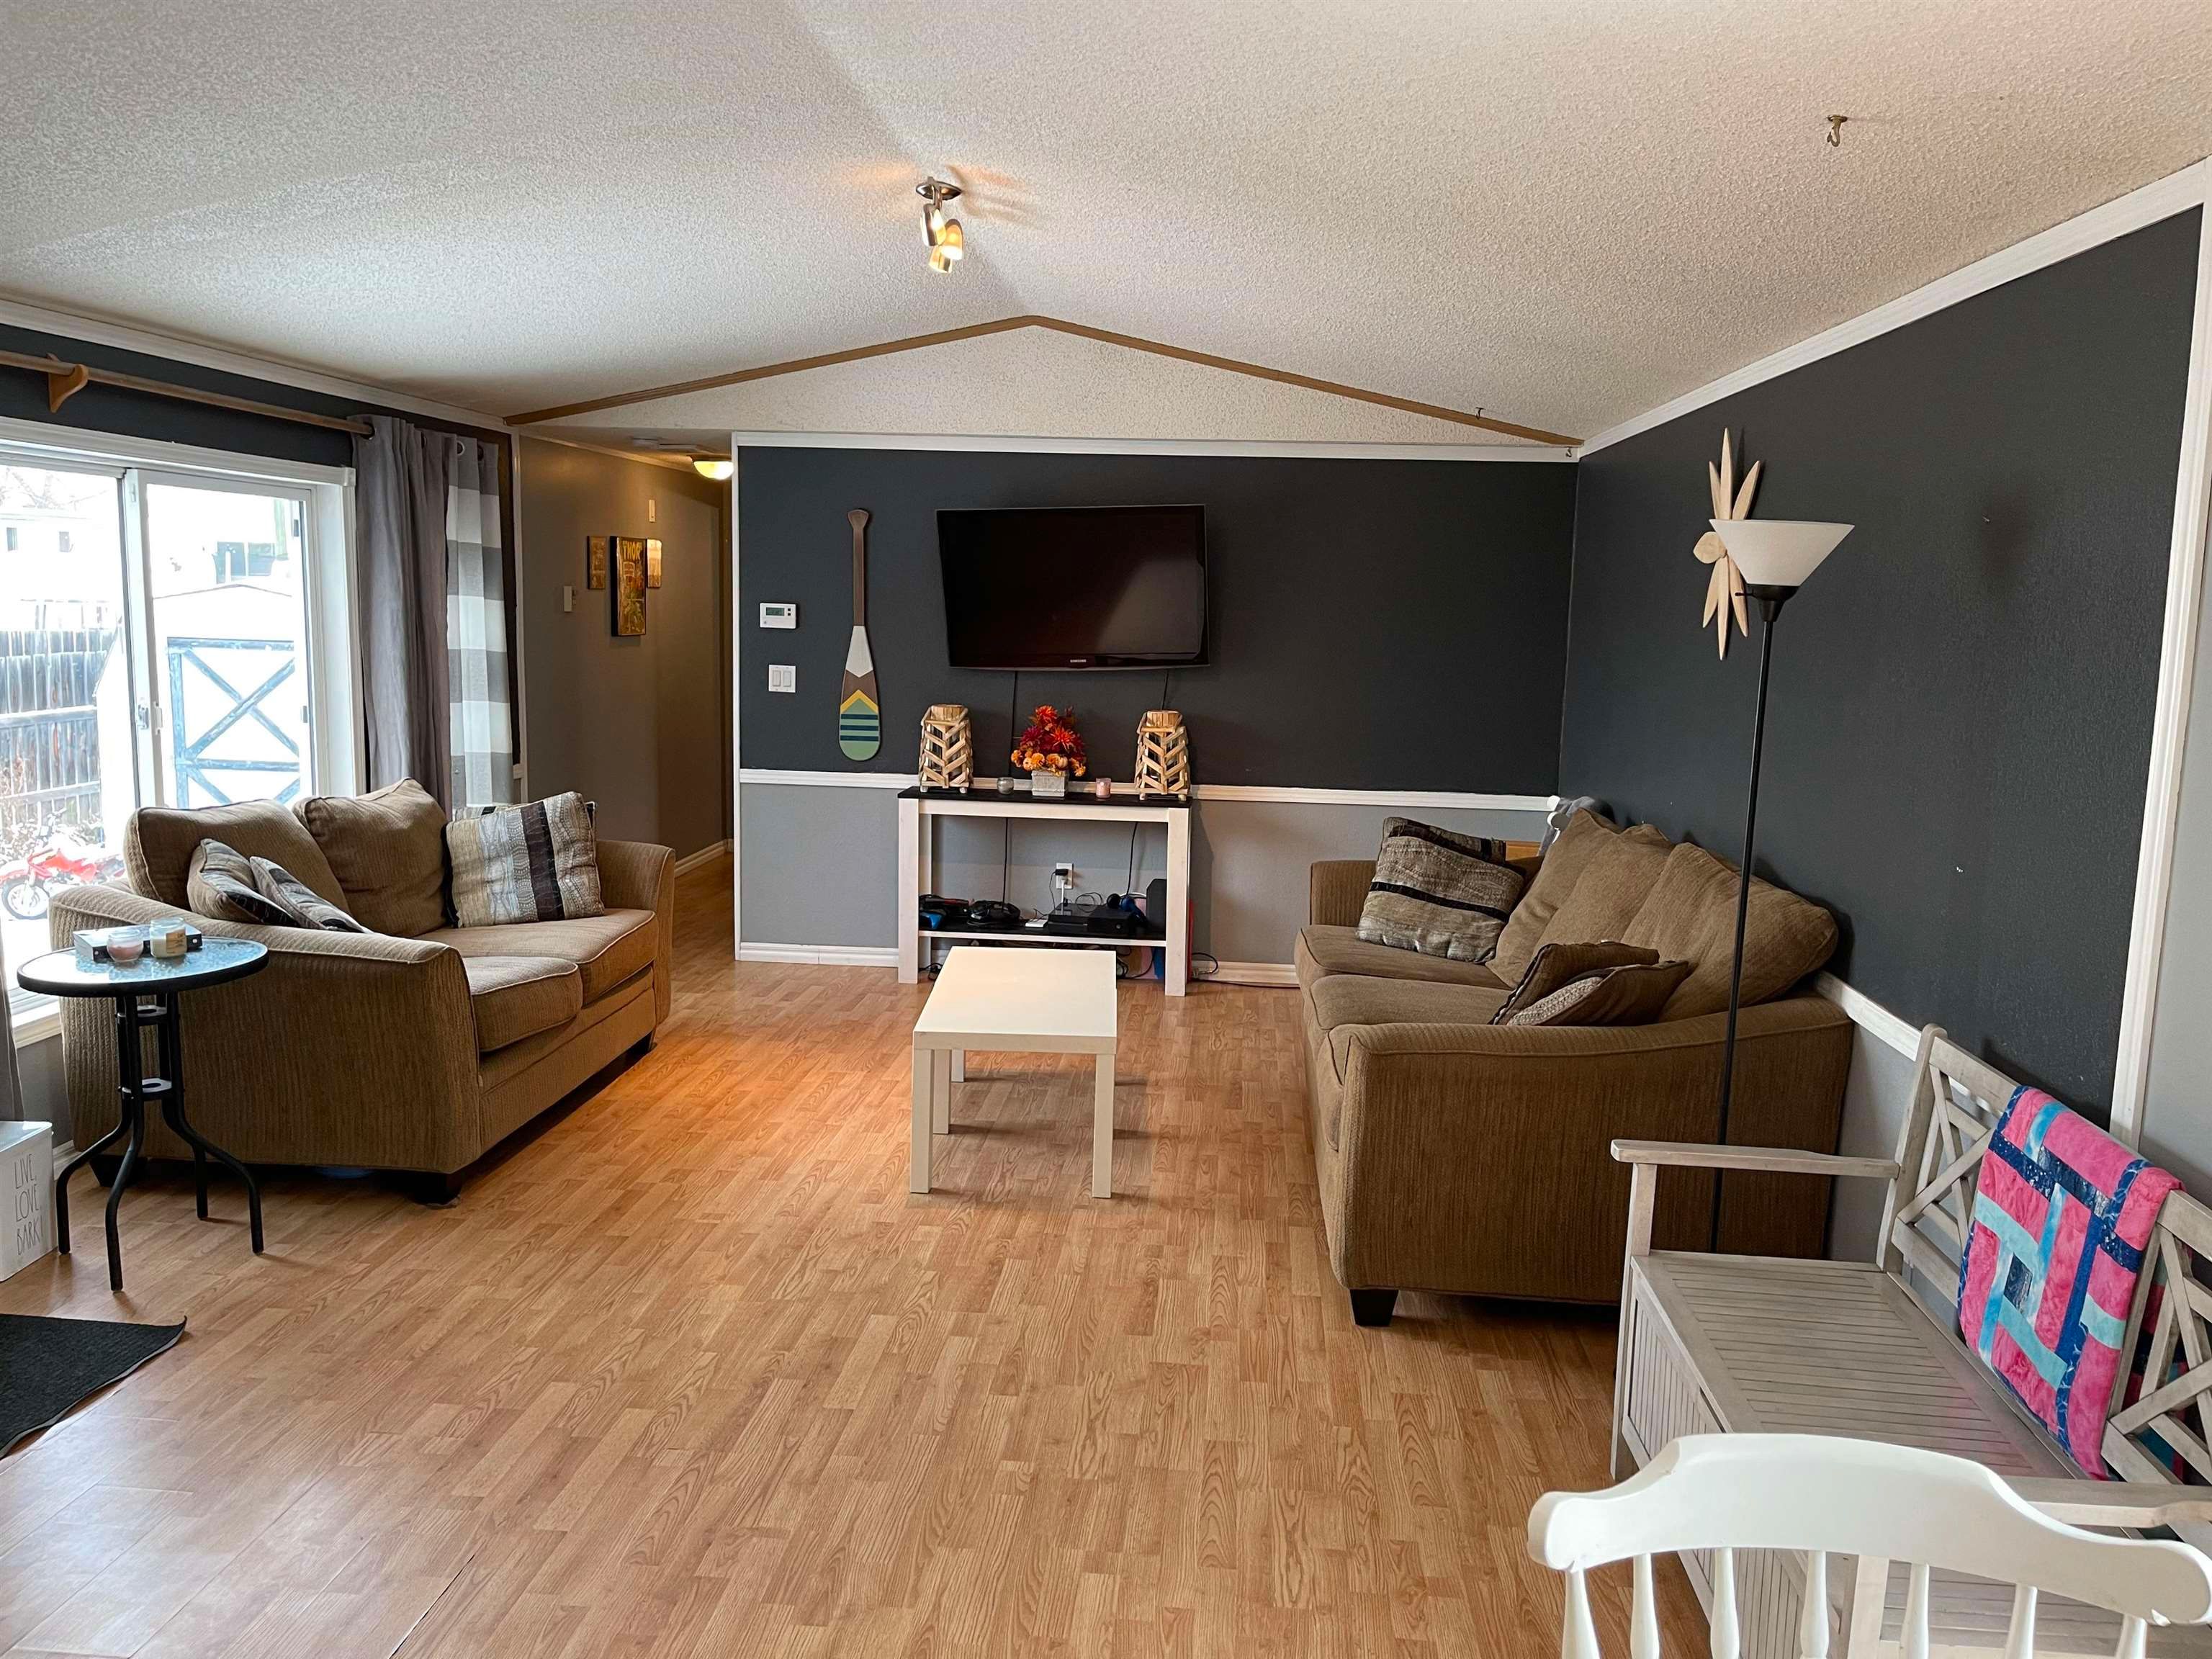 Photo 5: Photos: 10339 99 Street: Taylor Manufactured Home for sale (Fort St. John)  : MLS®# R2632849